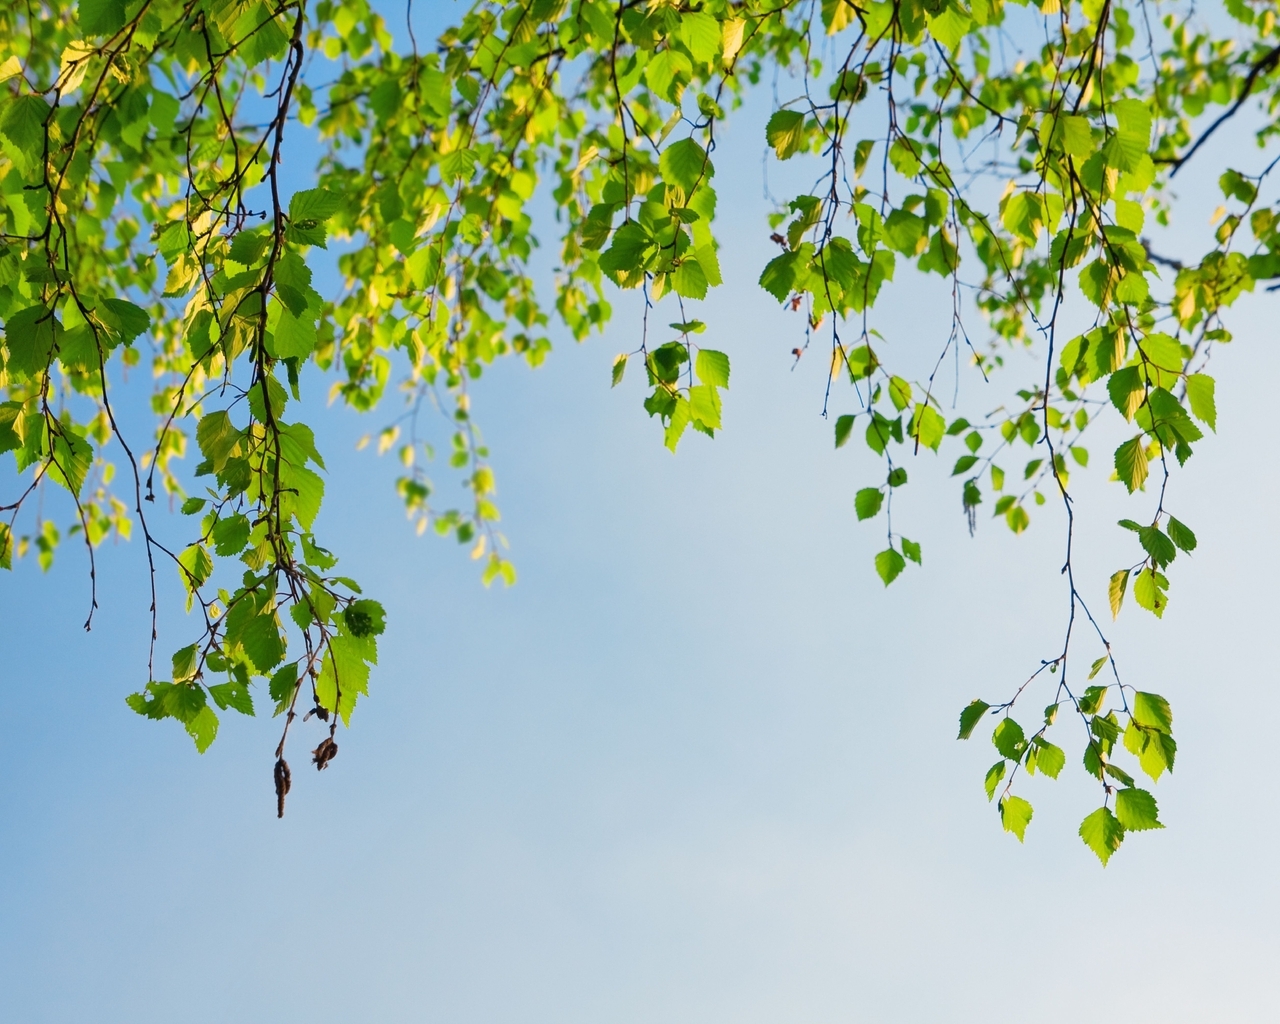 Image: Birch, branches, leaves, sky